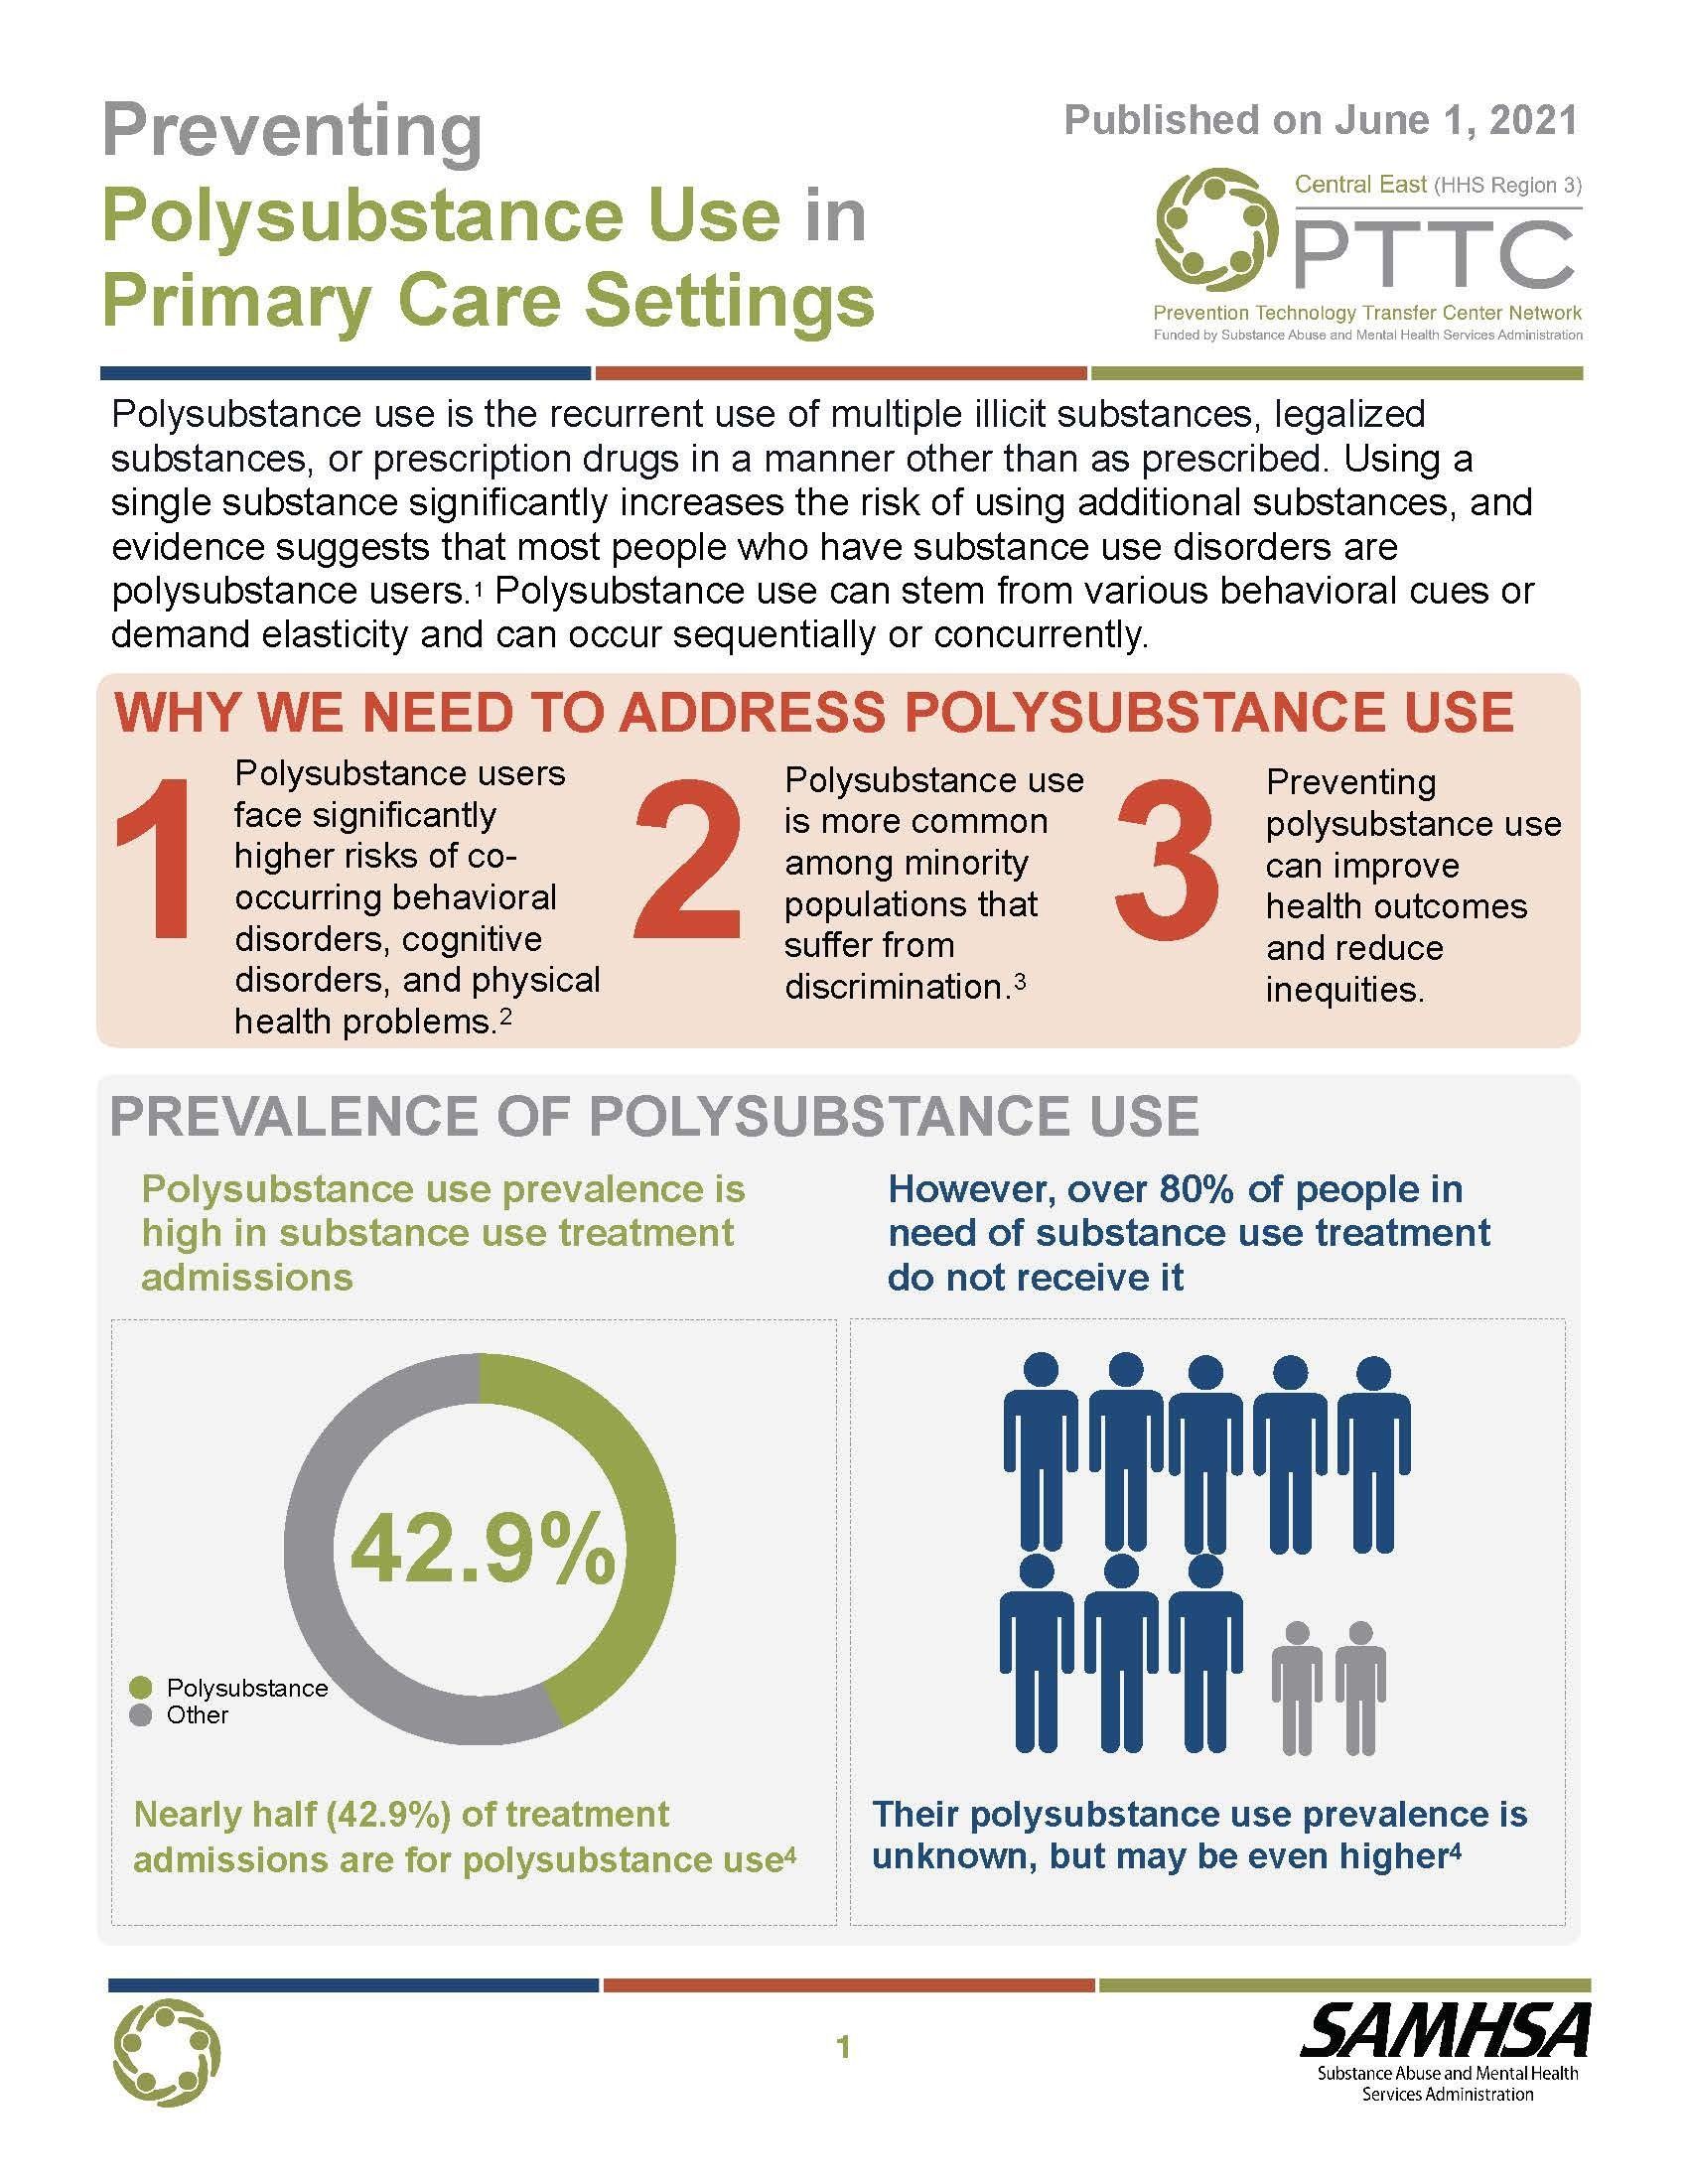 Preventing Polysubstance Use Prevention in Primary Care Settings